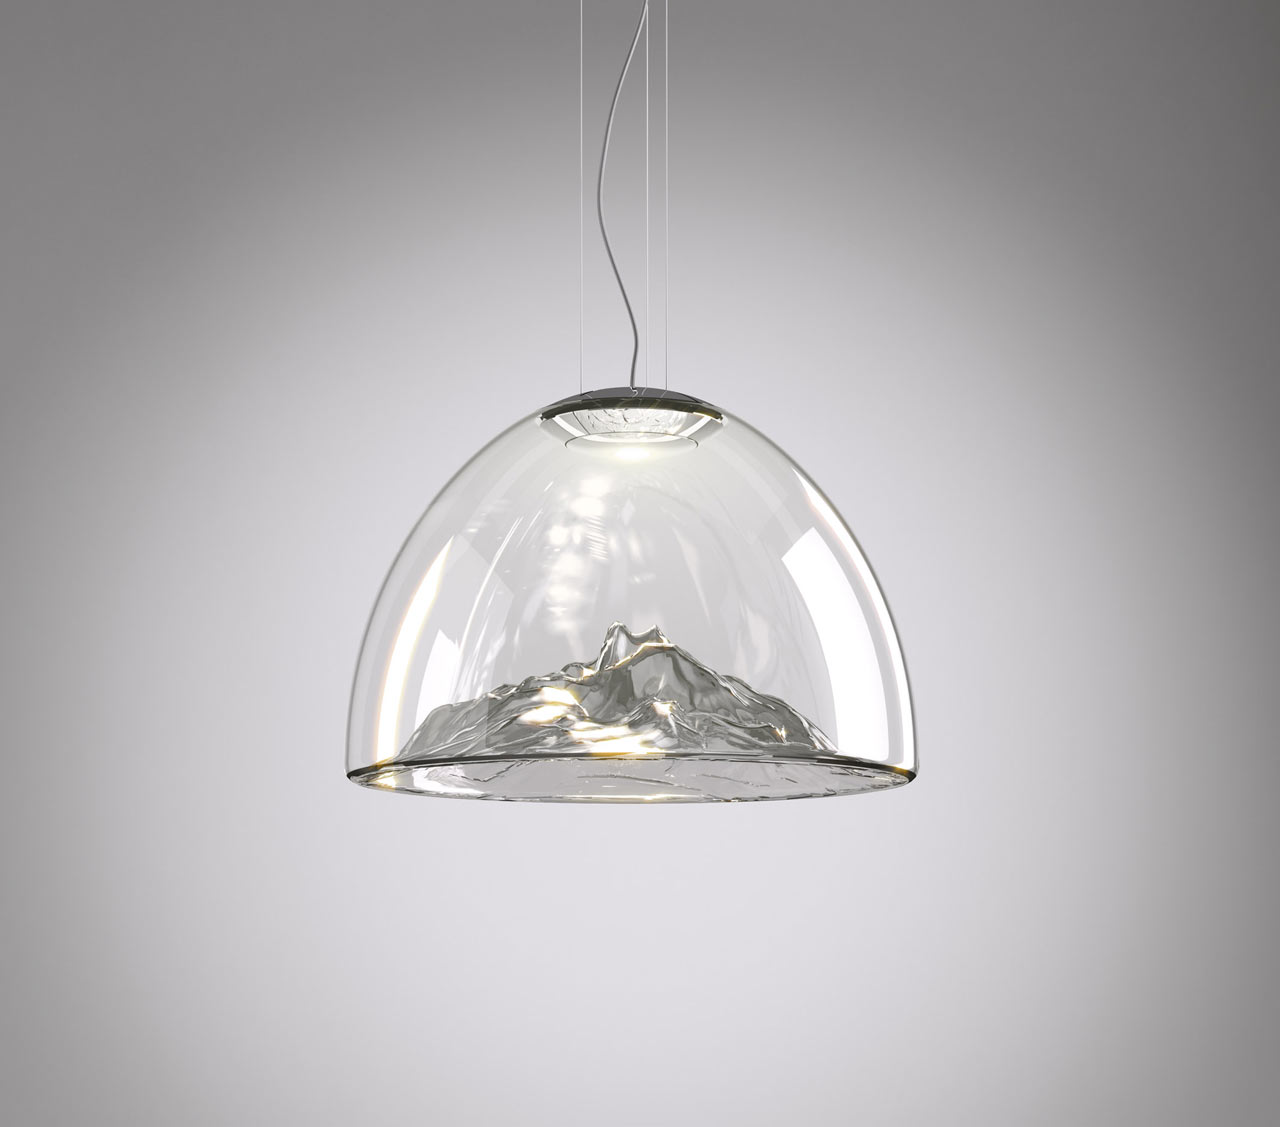 Lighting Inspired by Japanese Fishing Floats